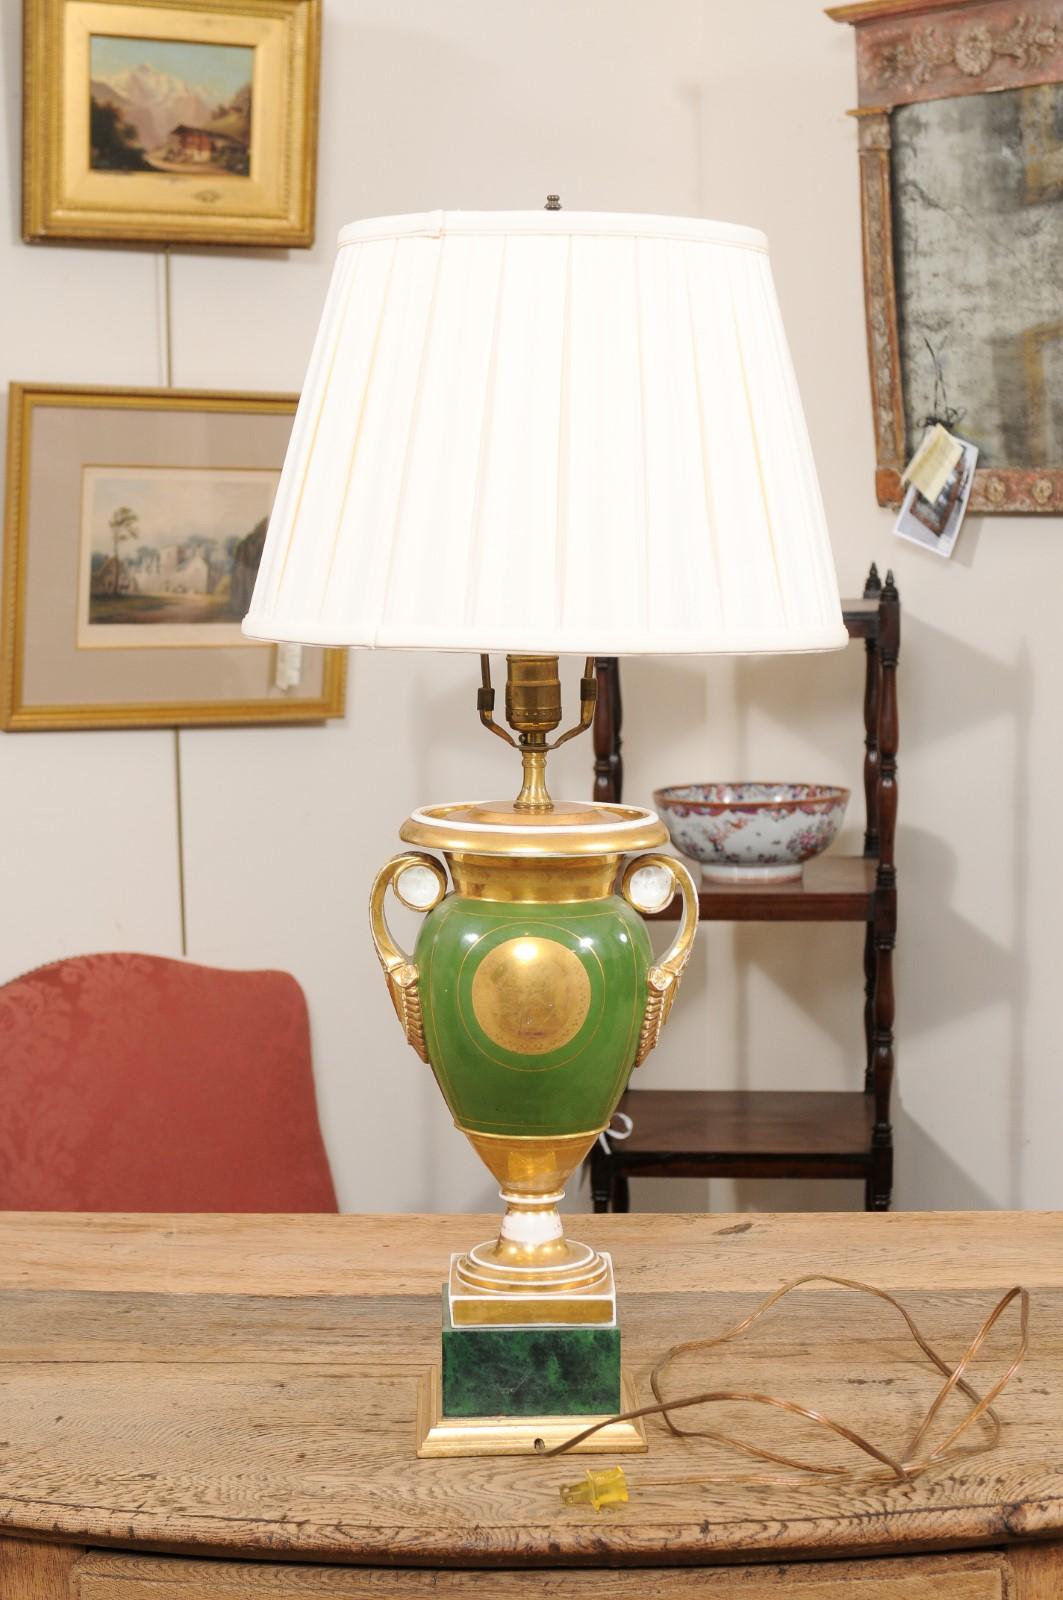 Large 19th Century Paris Porcelain Vase wired as a Lamp
